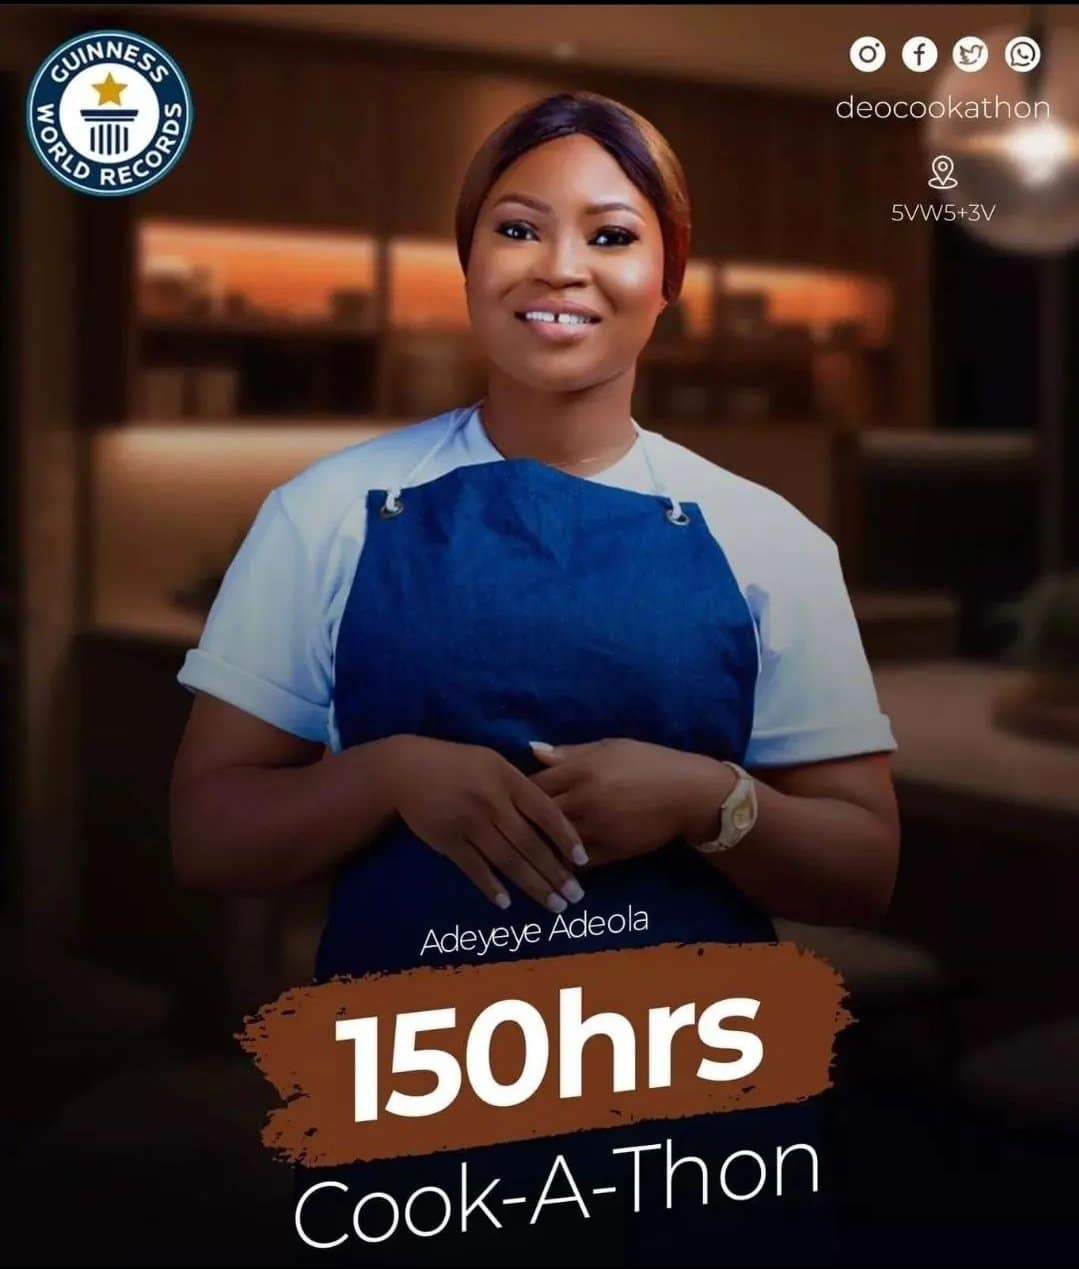 "Guinness World Records approved my cook-a-thon" – Chef Deo